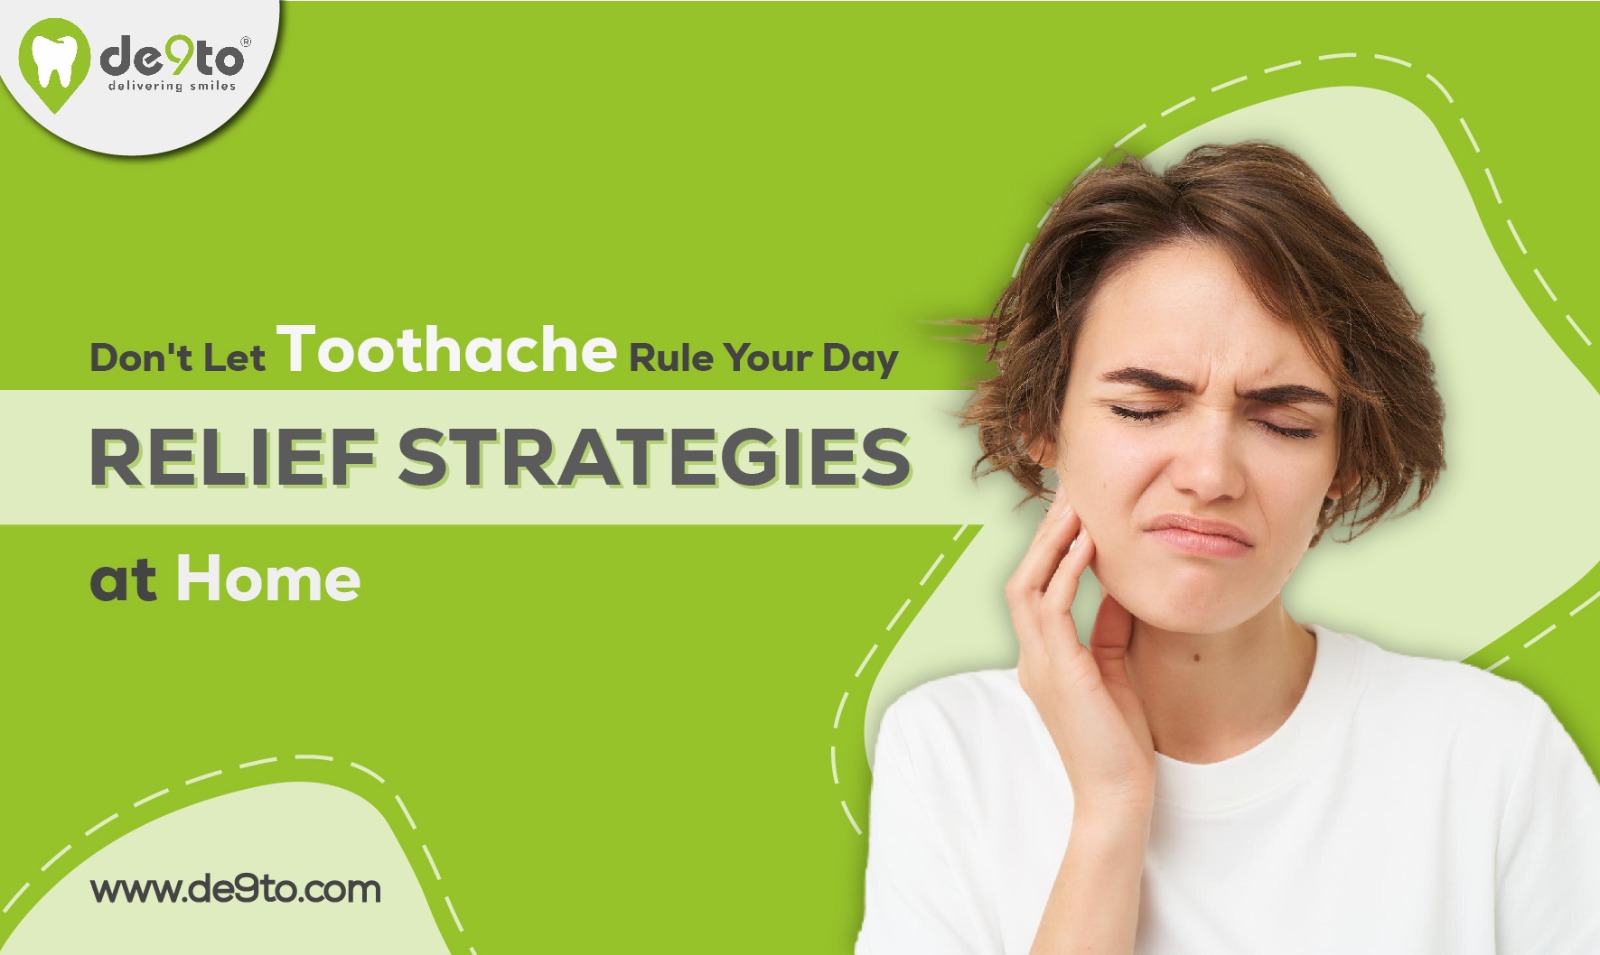 Don’t Let Toothache Rule Your Day: Relief Strategies at Home